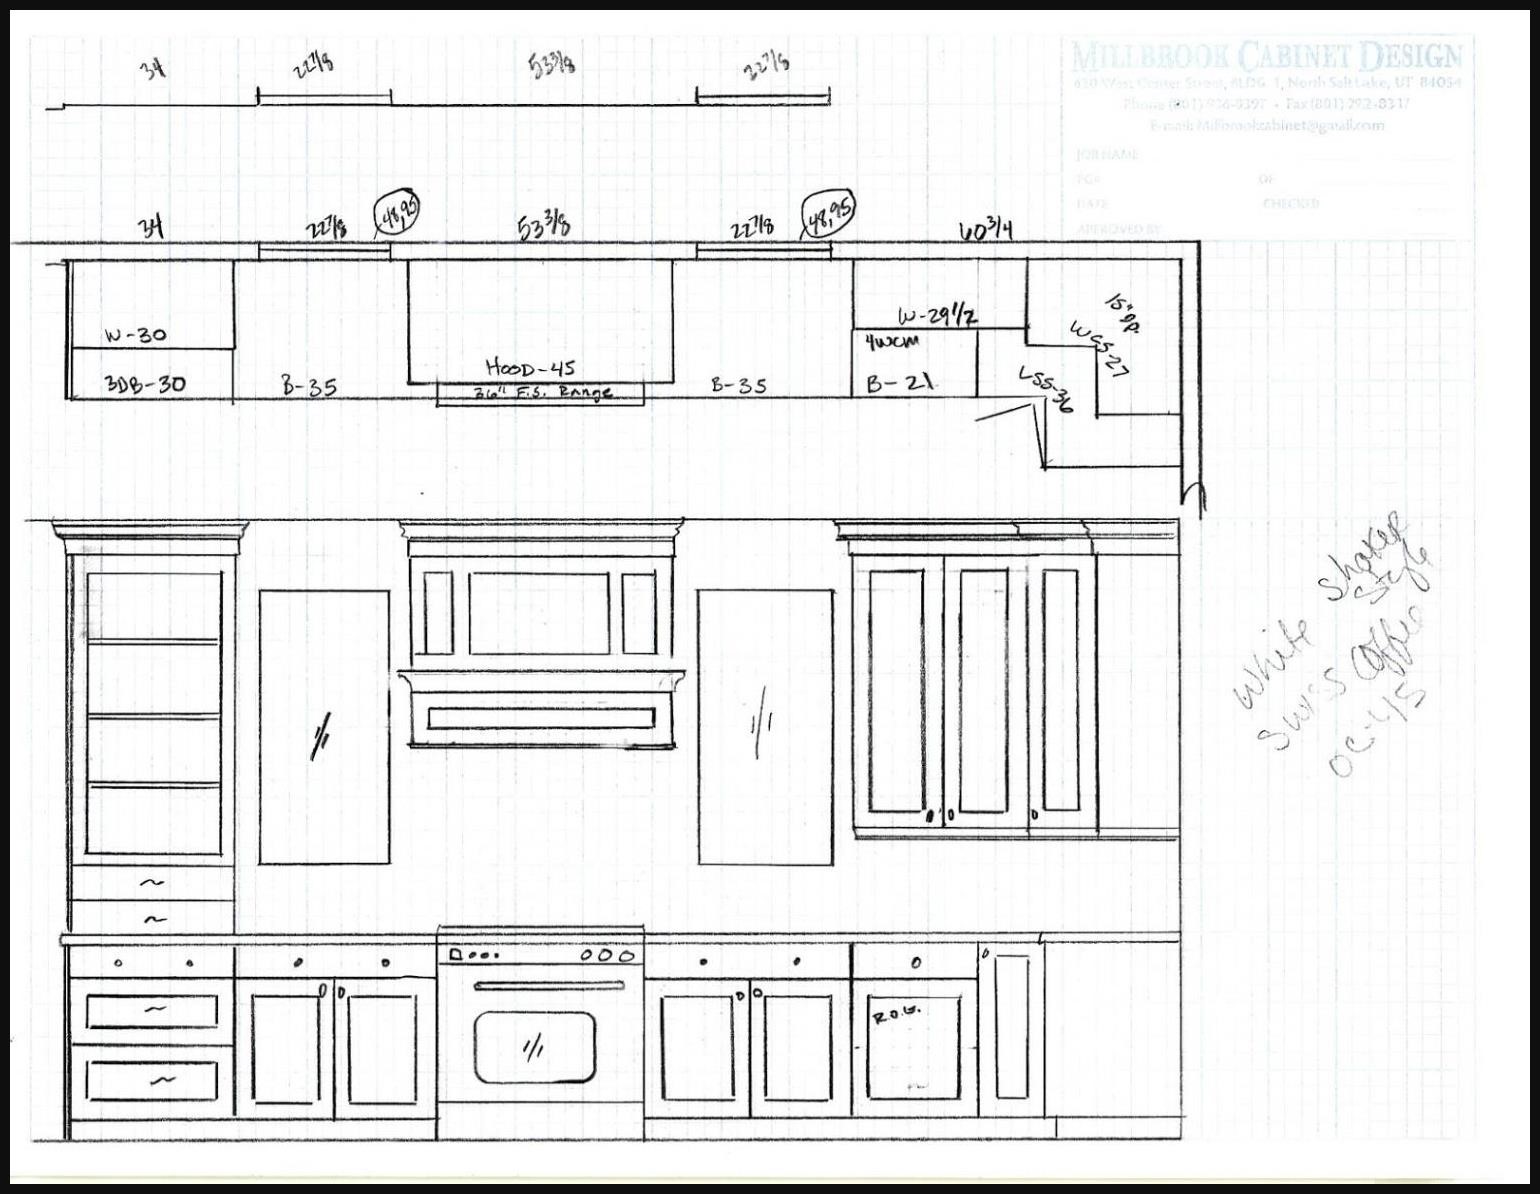 15 Kitchen Cabinet Shop Drawings Tag For Kitchen cabinets design drawings Kitchen,Cabinet,Shop,Drawings